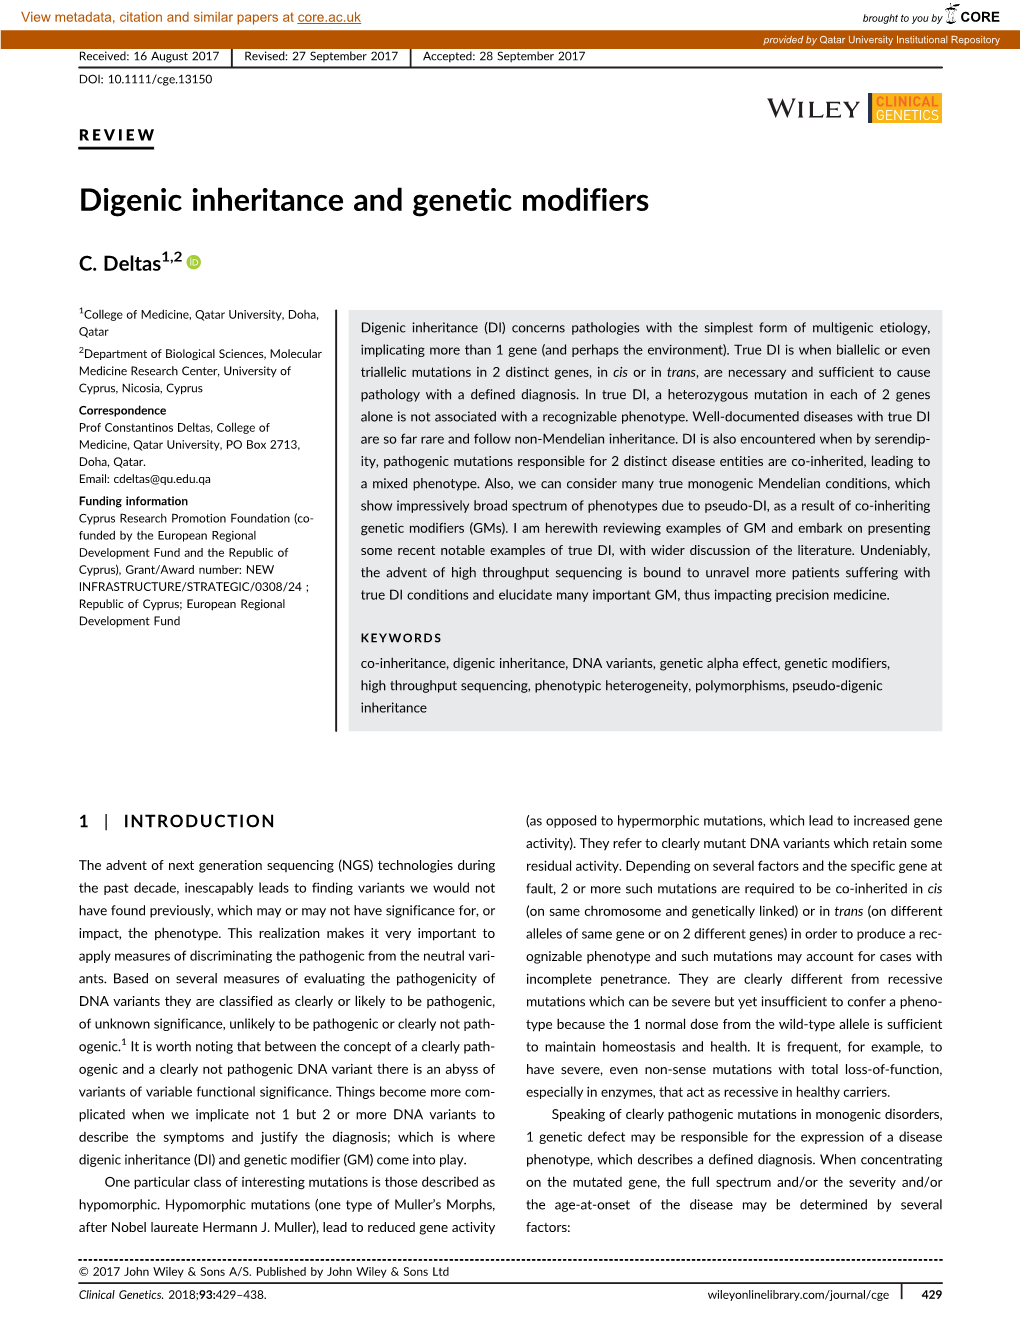 Digenic Inheritance and Genetic Modifiers